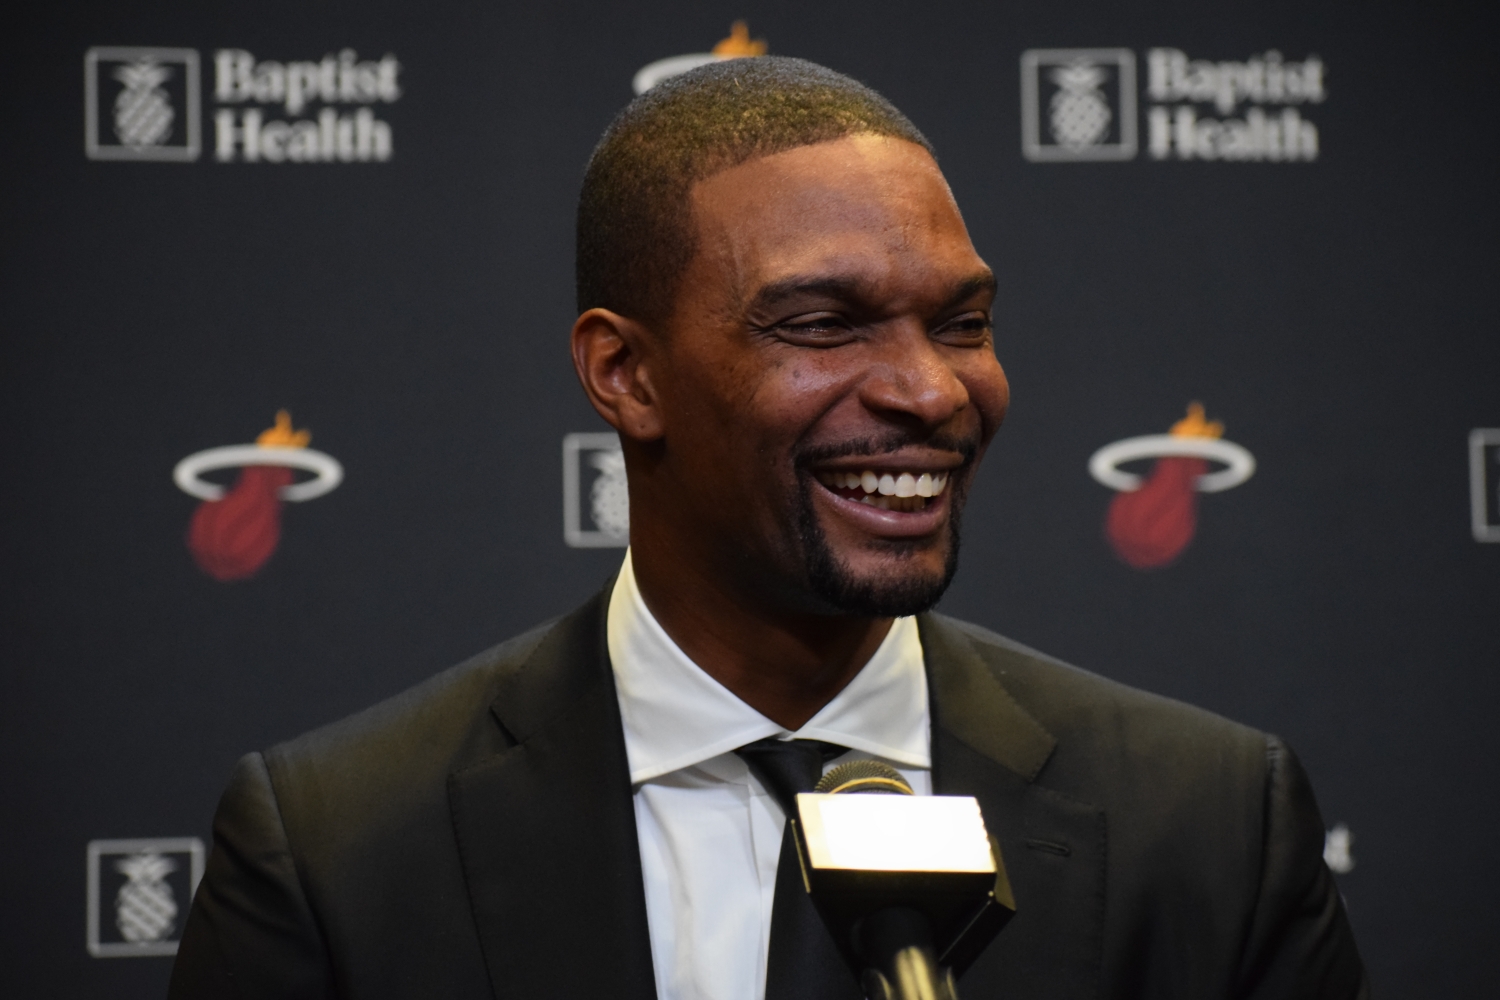 Chris Bosh reflects on career as Heat retires his jersey